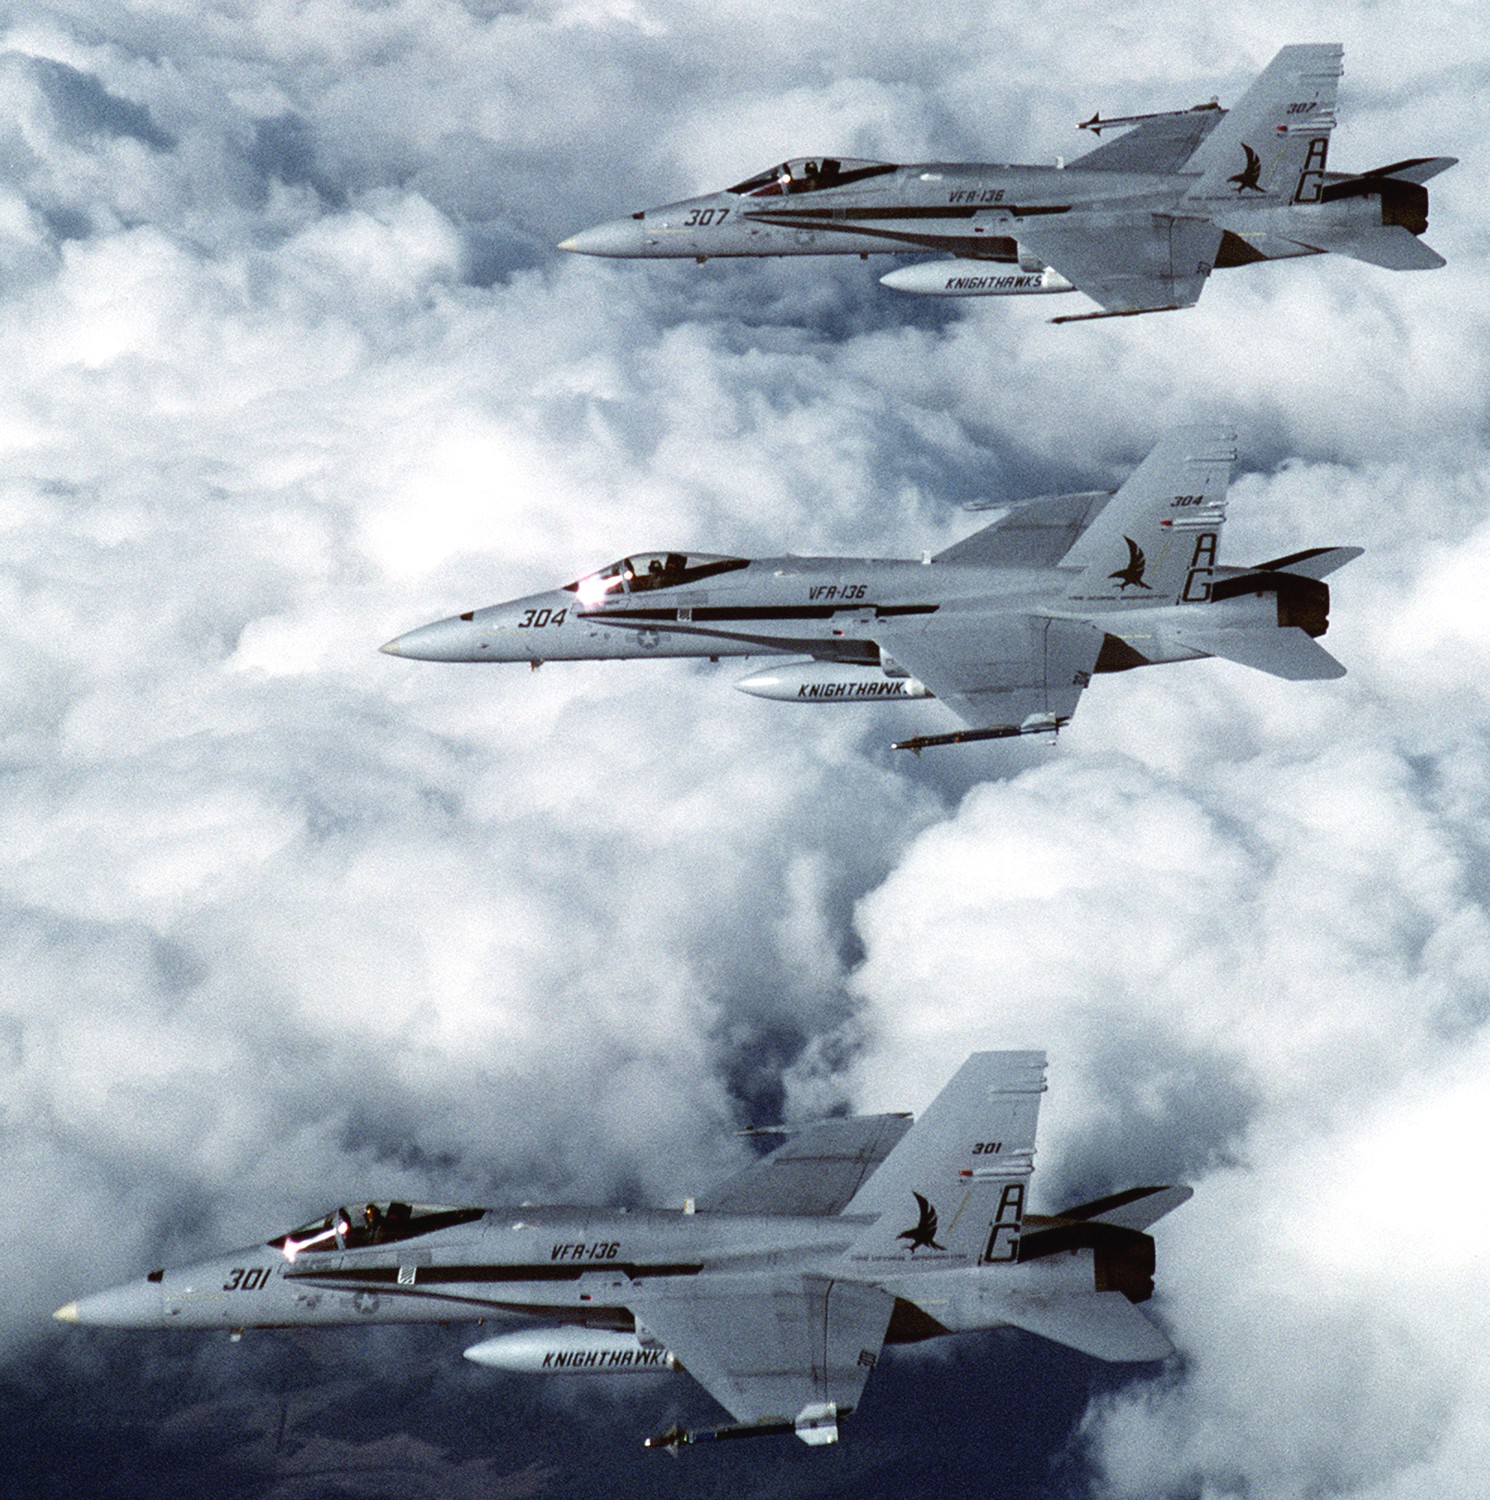 vfa-136 knighthawks strike fighter squadron f/a-18c hornet 1993 102 carrier air wing cvw-7